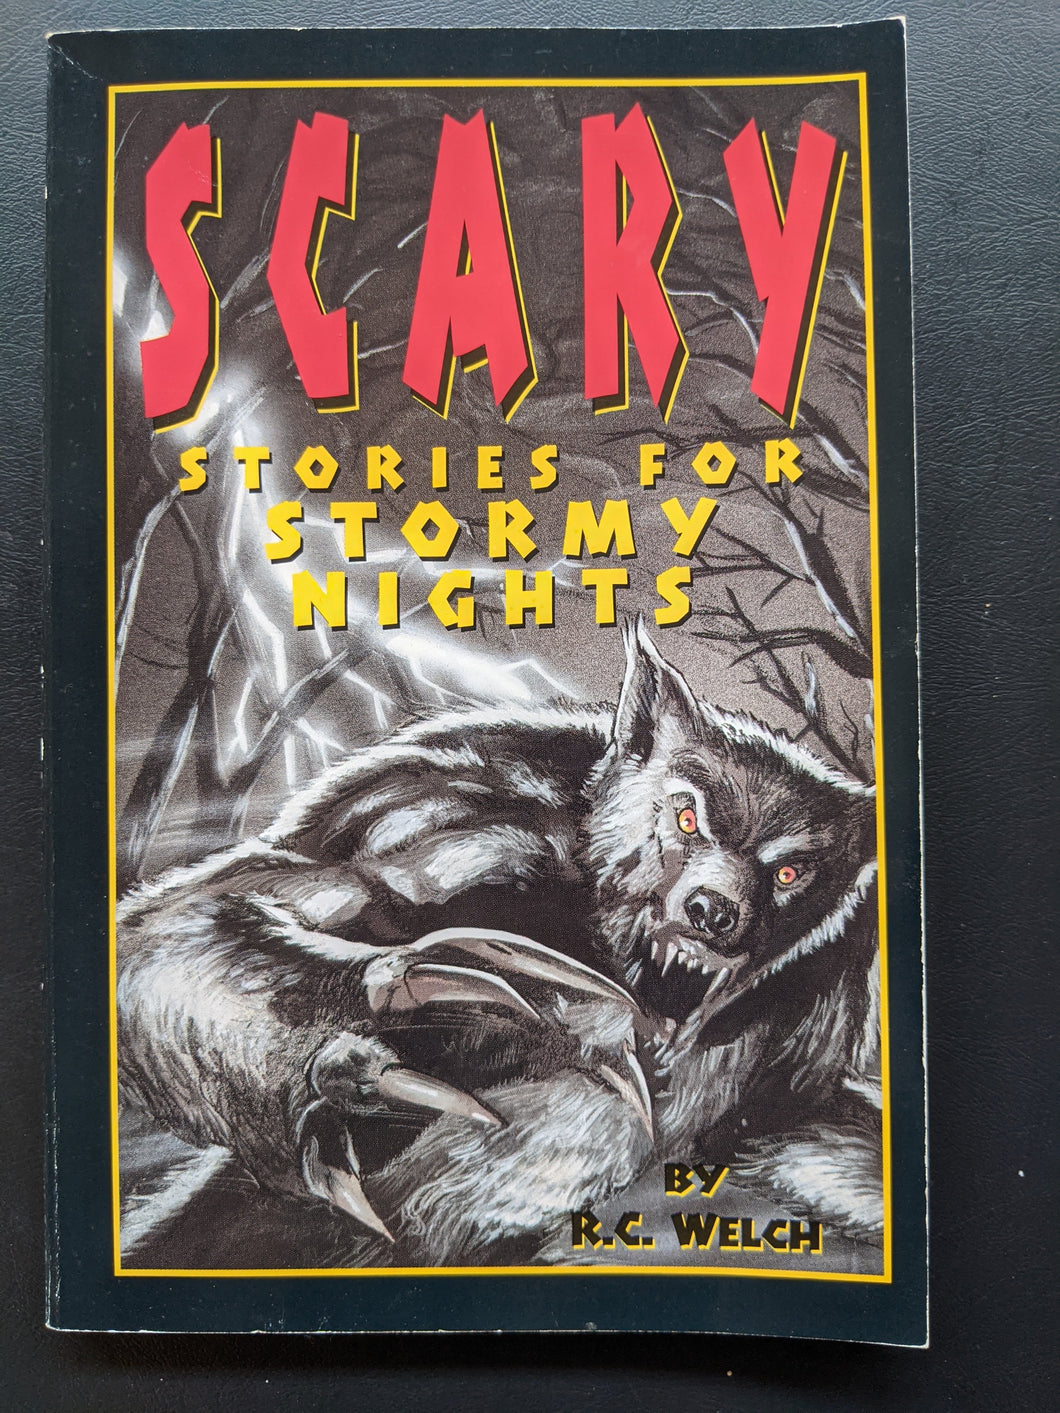 Scary Stories for Stormy Night by R.c. Welch